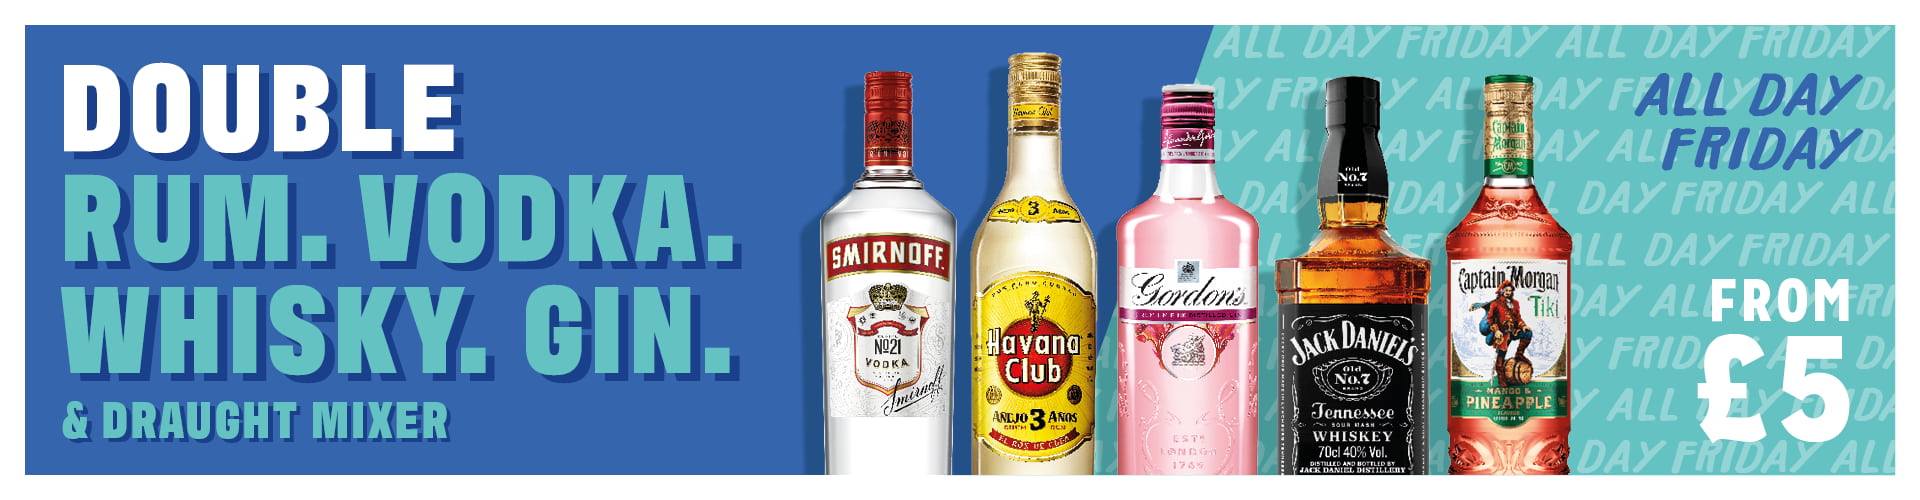 Double rum, vodka, whisky or gin and mixer for just £5. Available all day Friday.